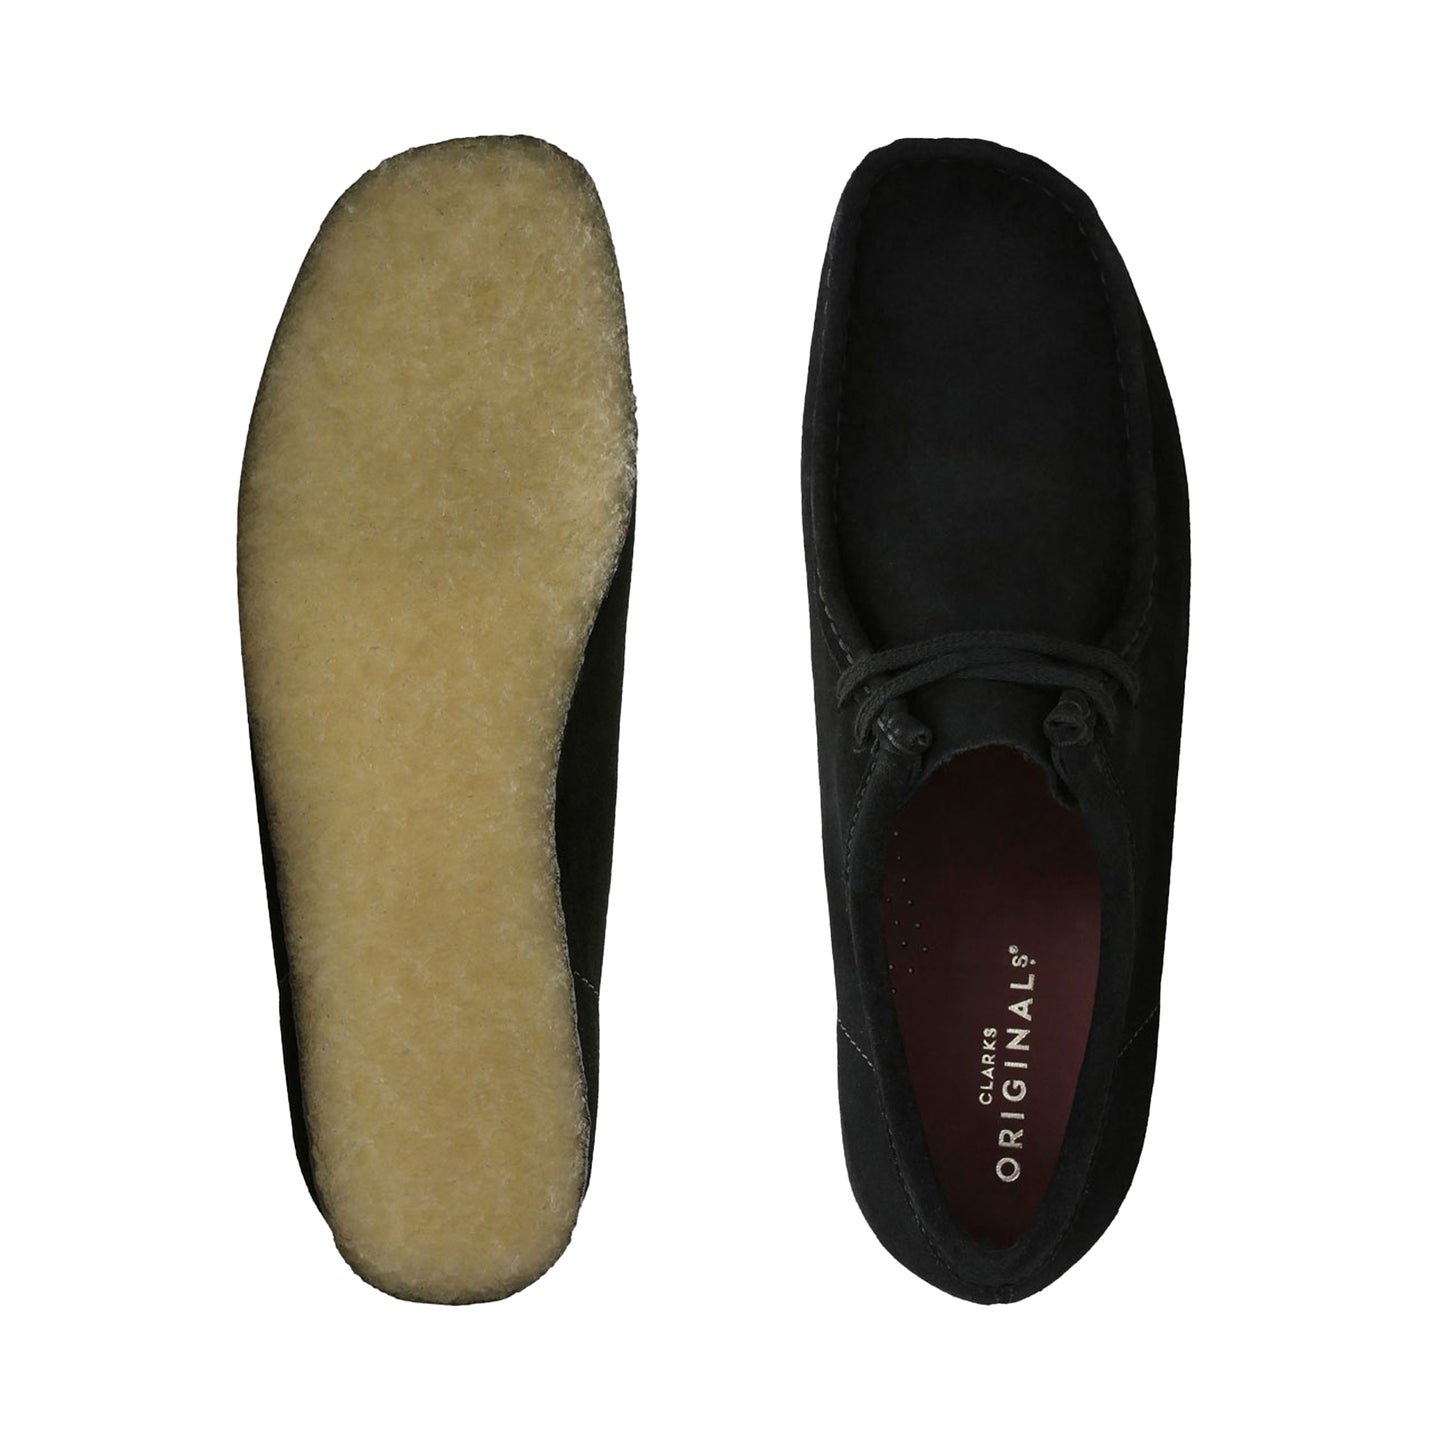 Clarks Wallabees